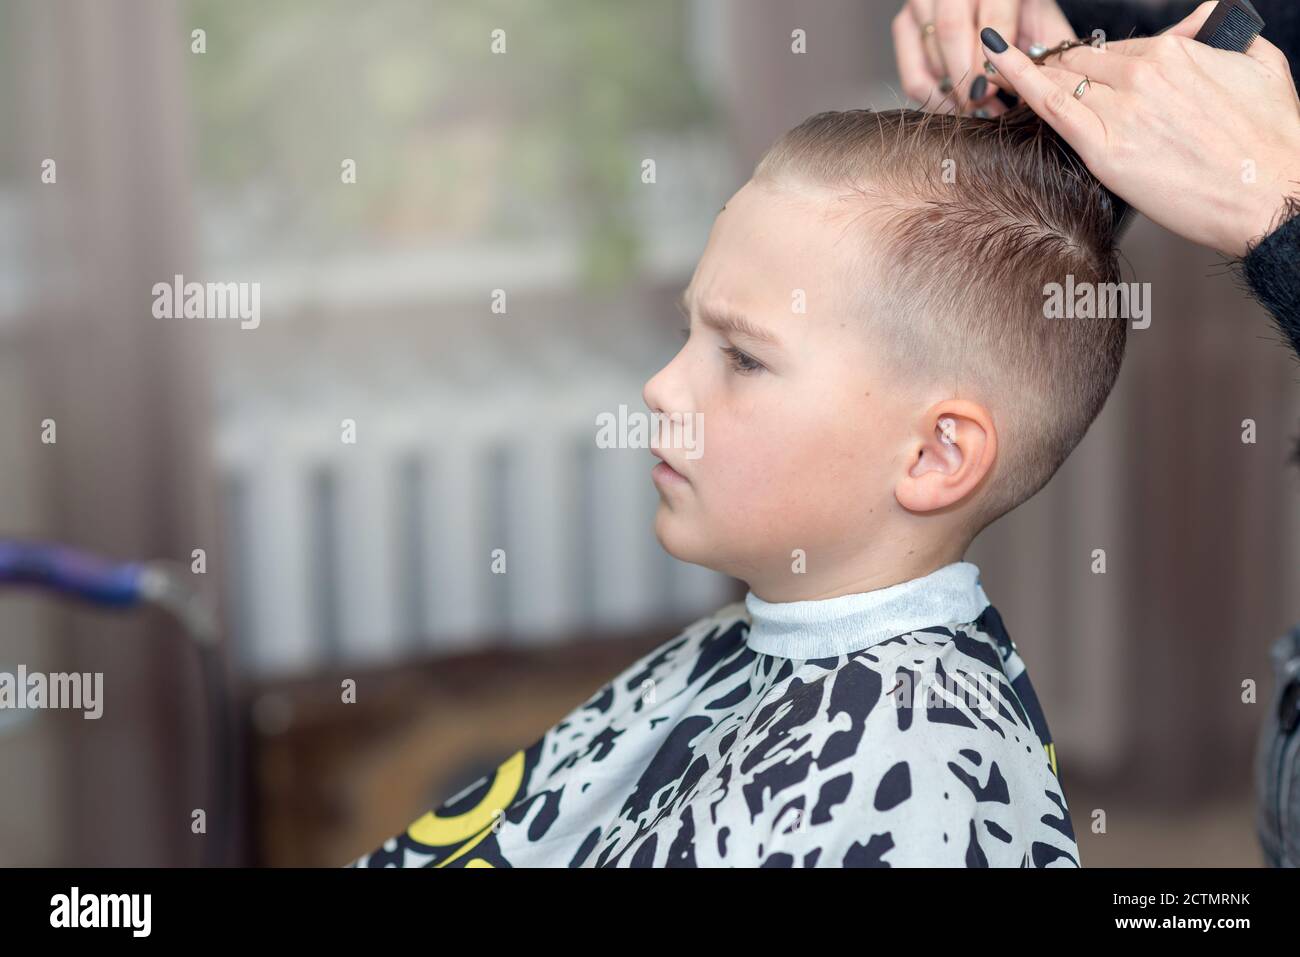 Hairdresser makes a stylish hairstyle. The woman is standing and making  haircut for blonde boy. Side view image Stock Photo - Alamy